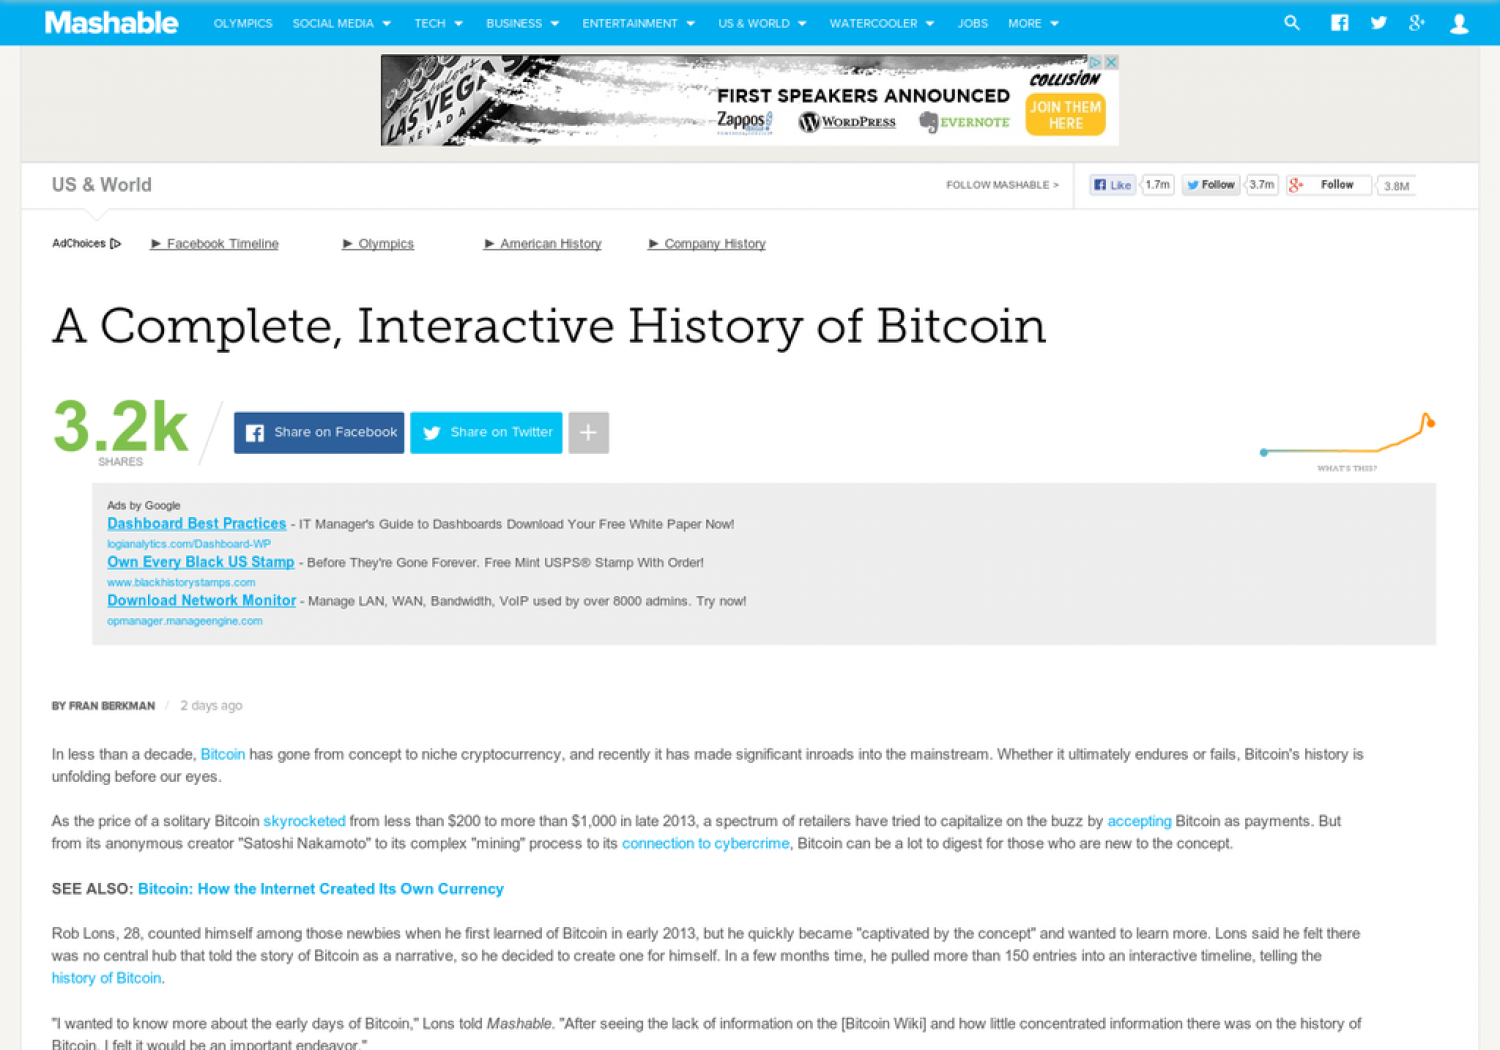 A Complete, Interactive History of Bitcoin Infographic